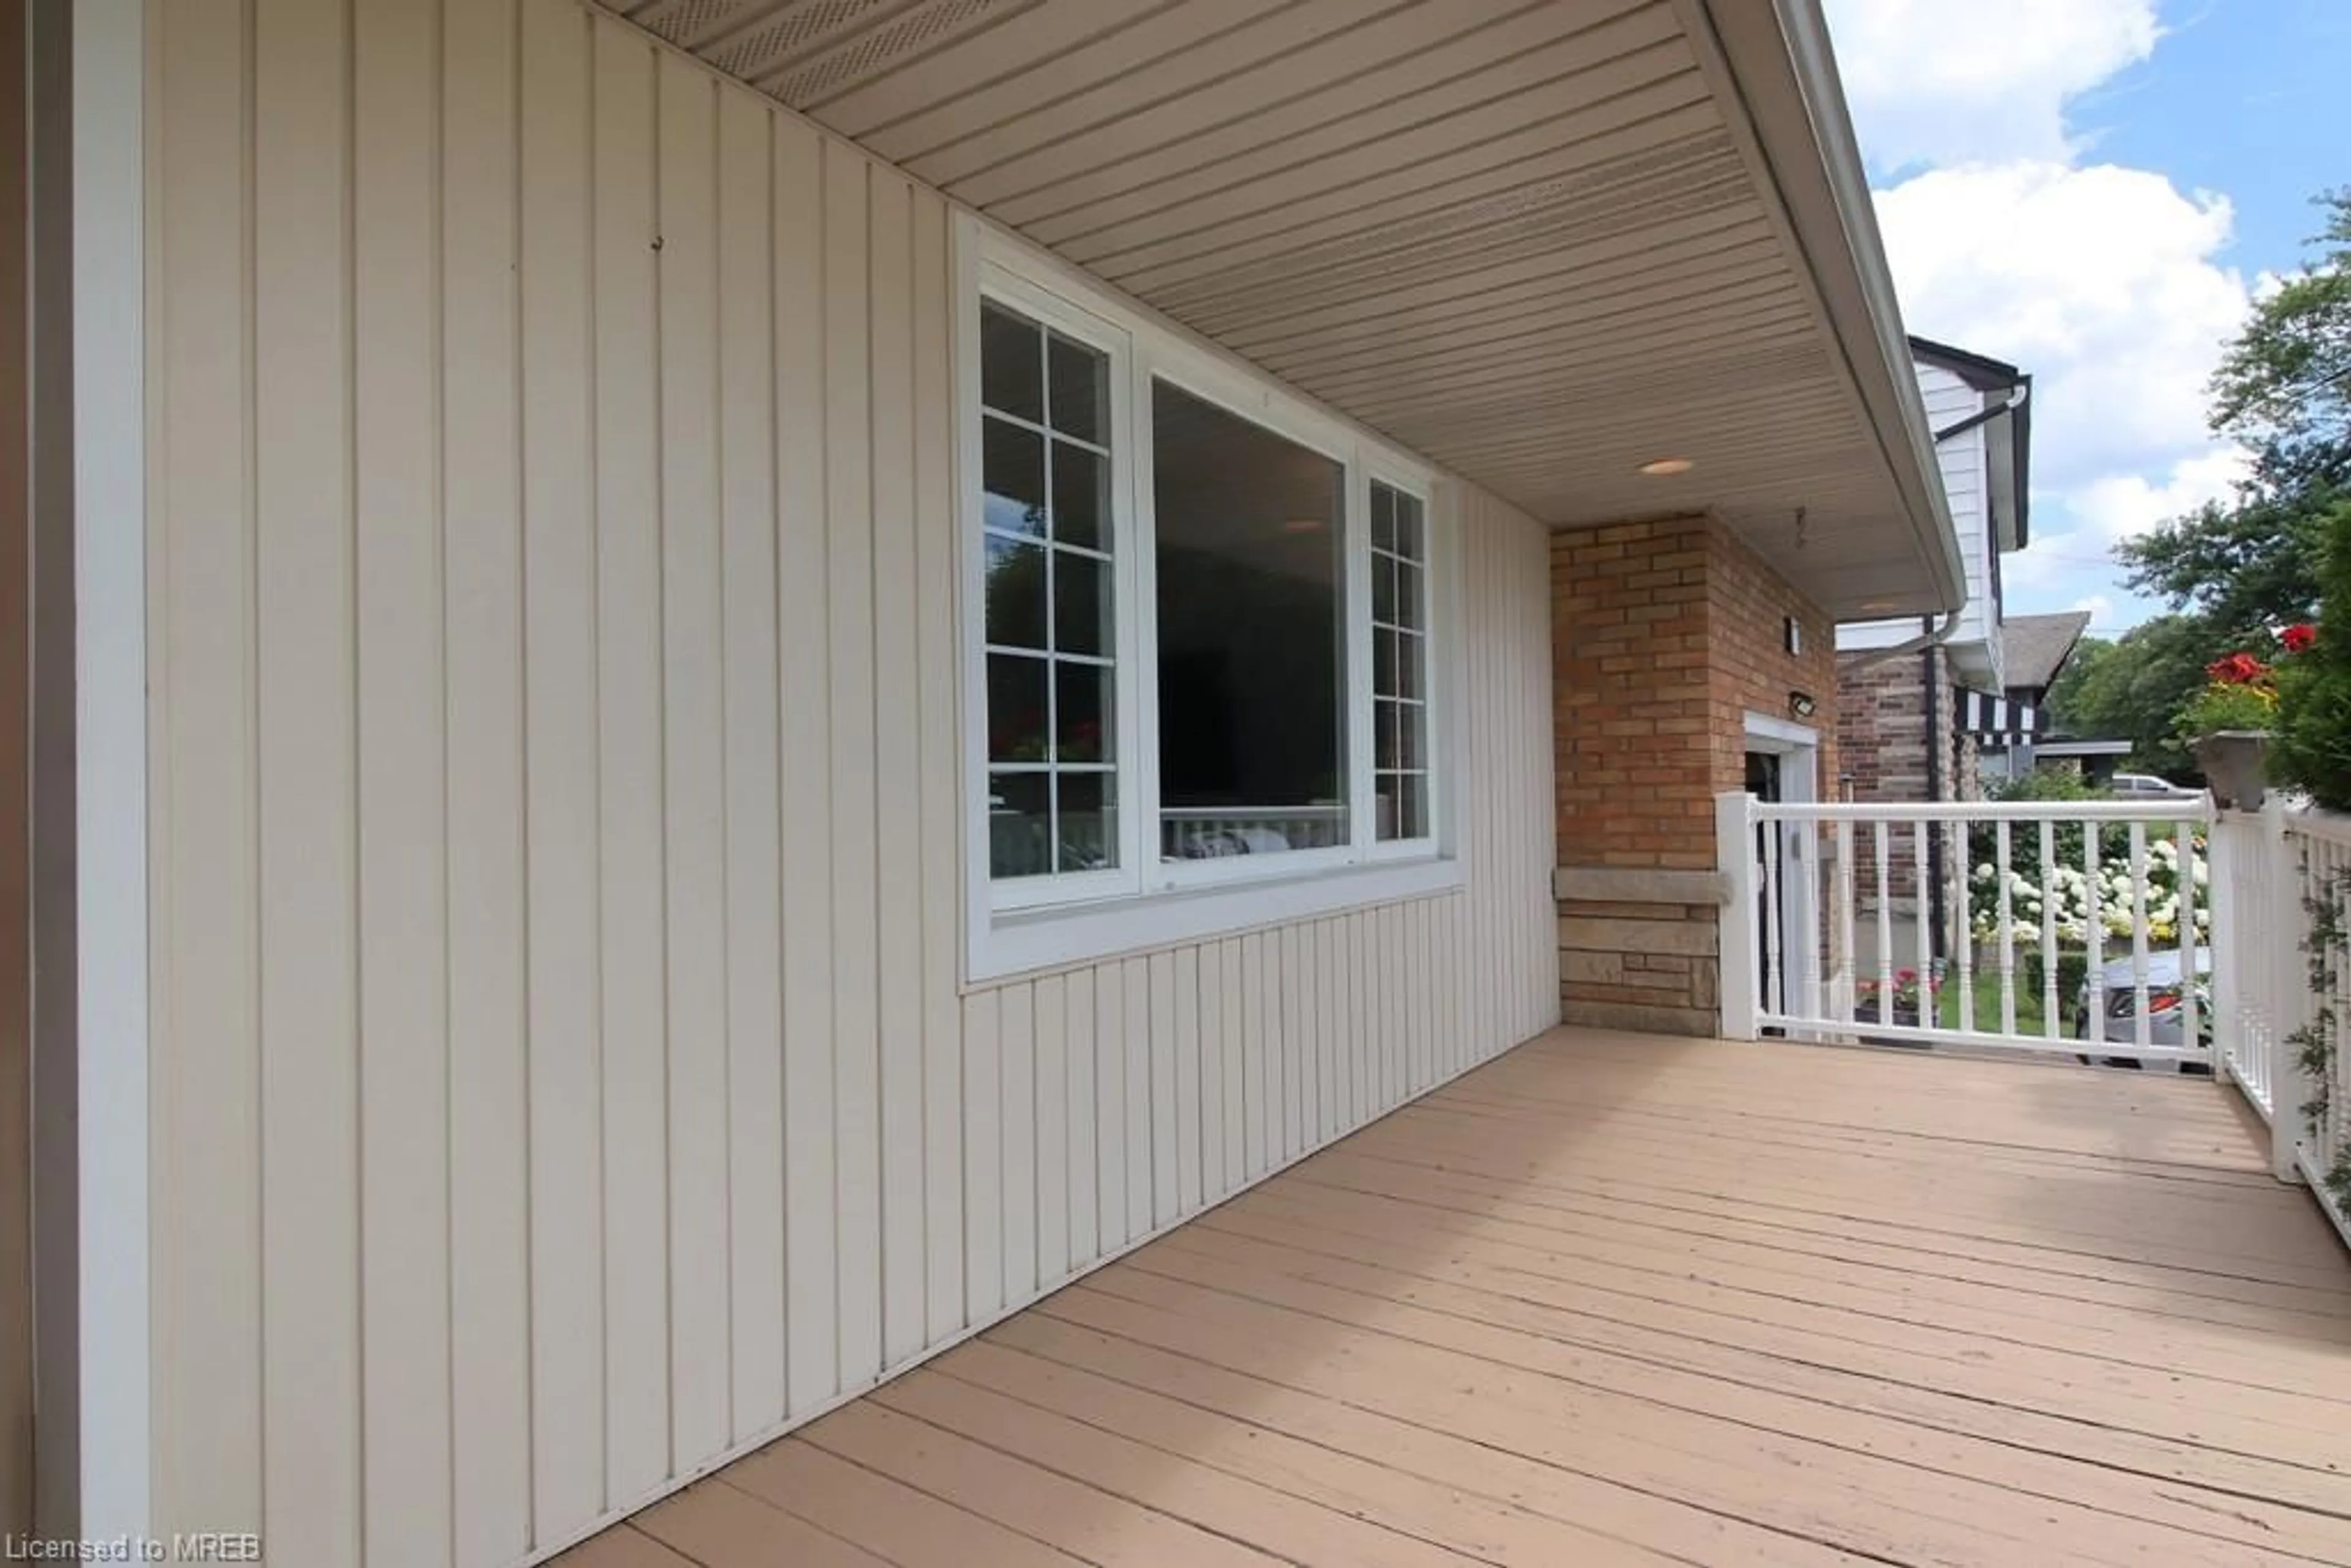 Home with vinyl exterior material for 60 Third St, Welland Ontario L3B 4W4